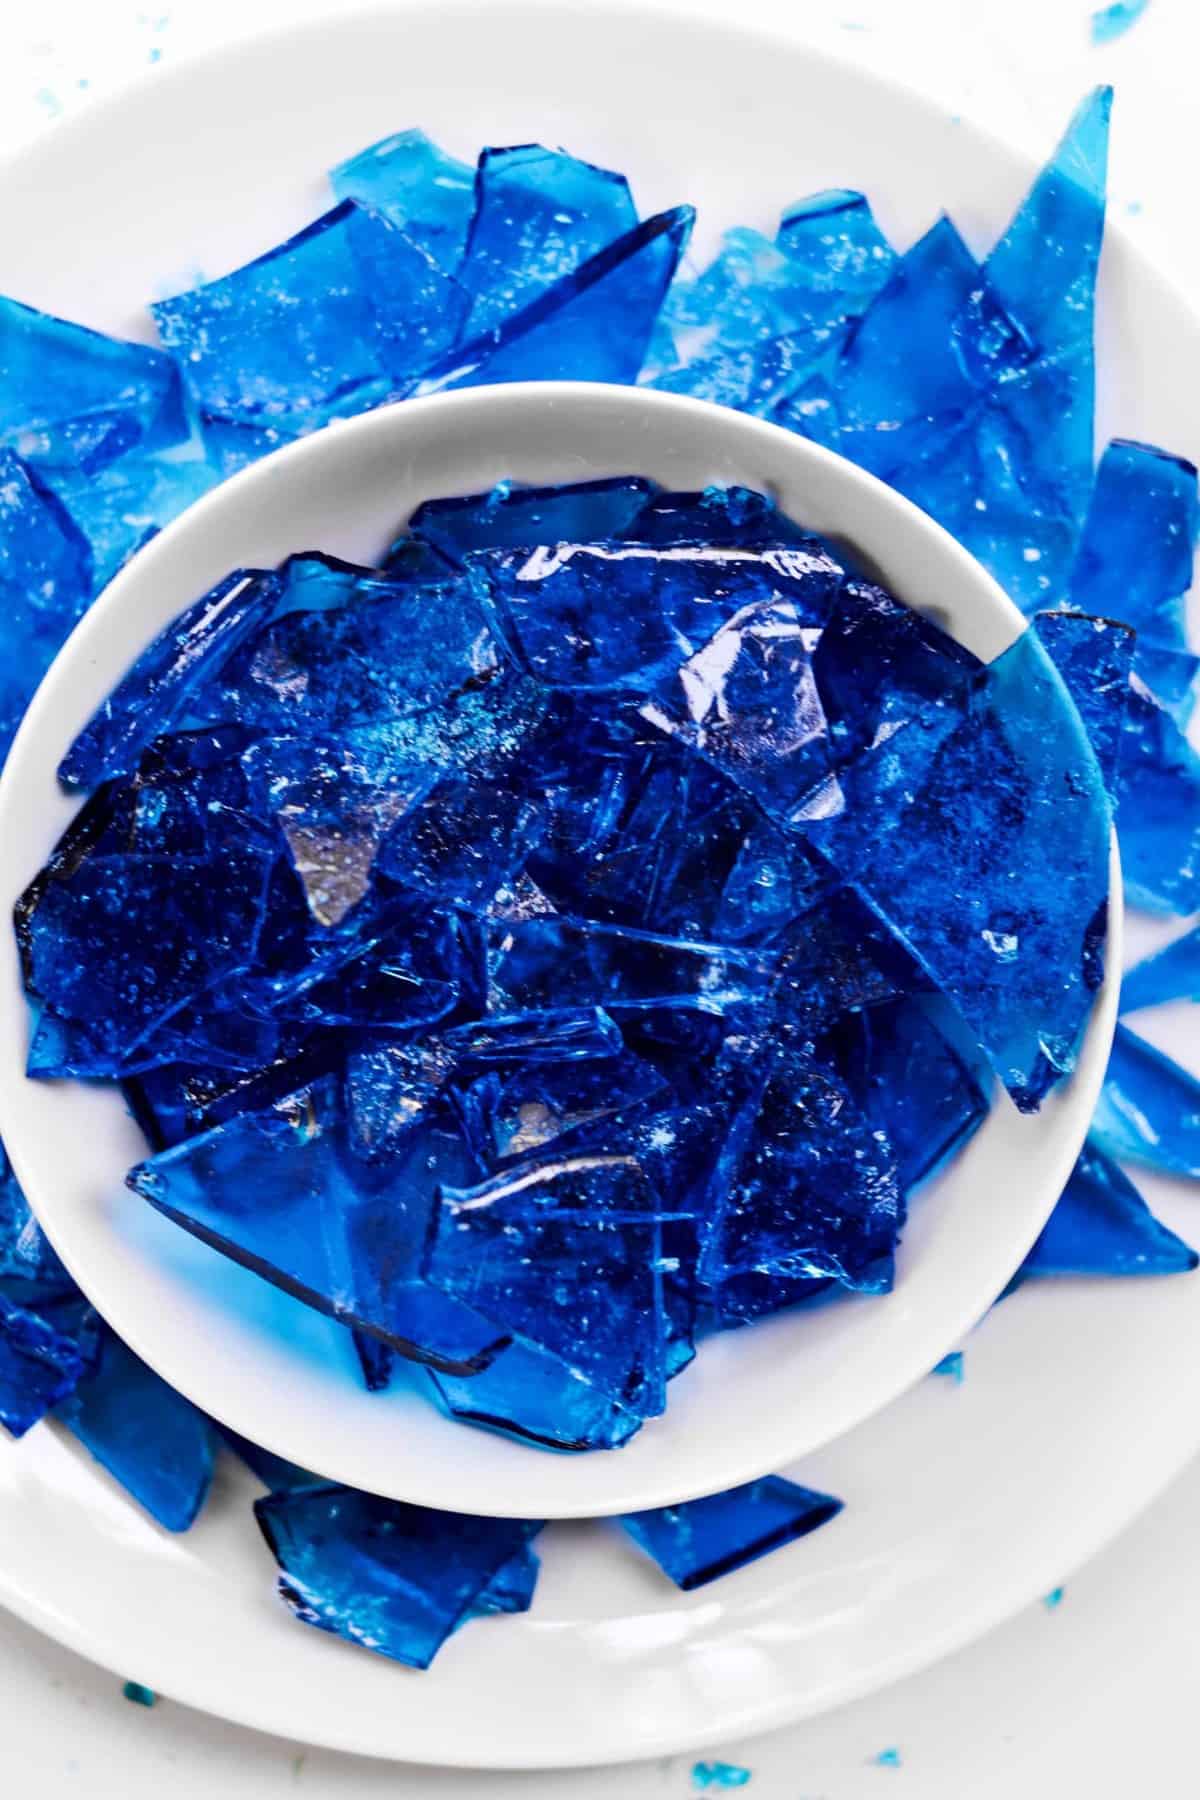 How To Make Rock Candy Blue Rock Candy Recipe The Cookie Rookie,Homemade Meatloaf Best Meatloaf Recipe